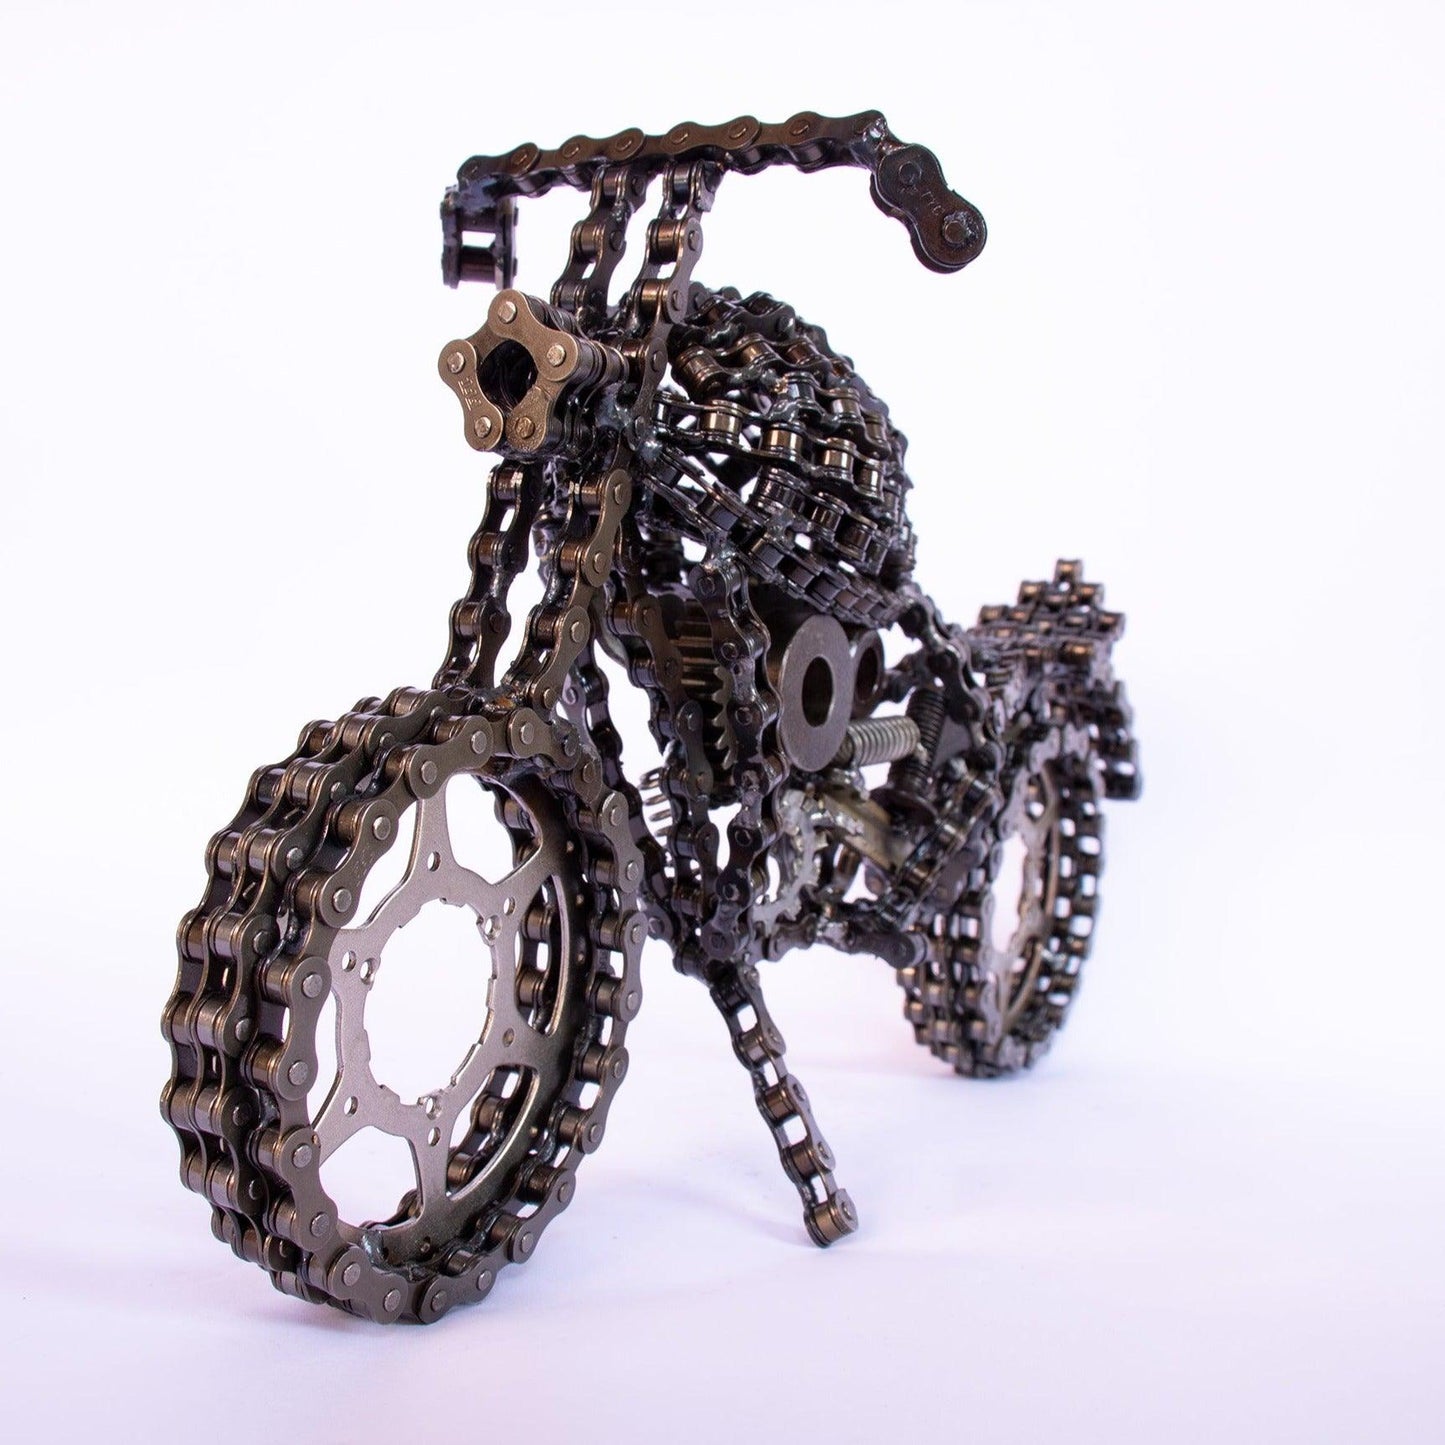 Motorcycle Sculpture | UNCHAINED by NIRIT LEVAV PACKER